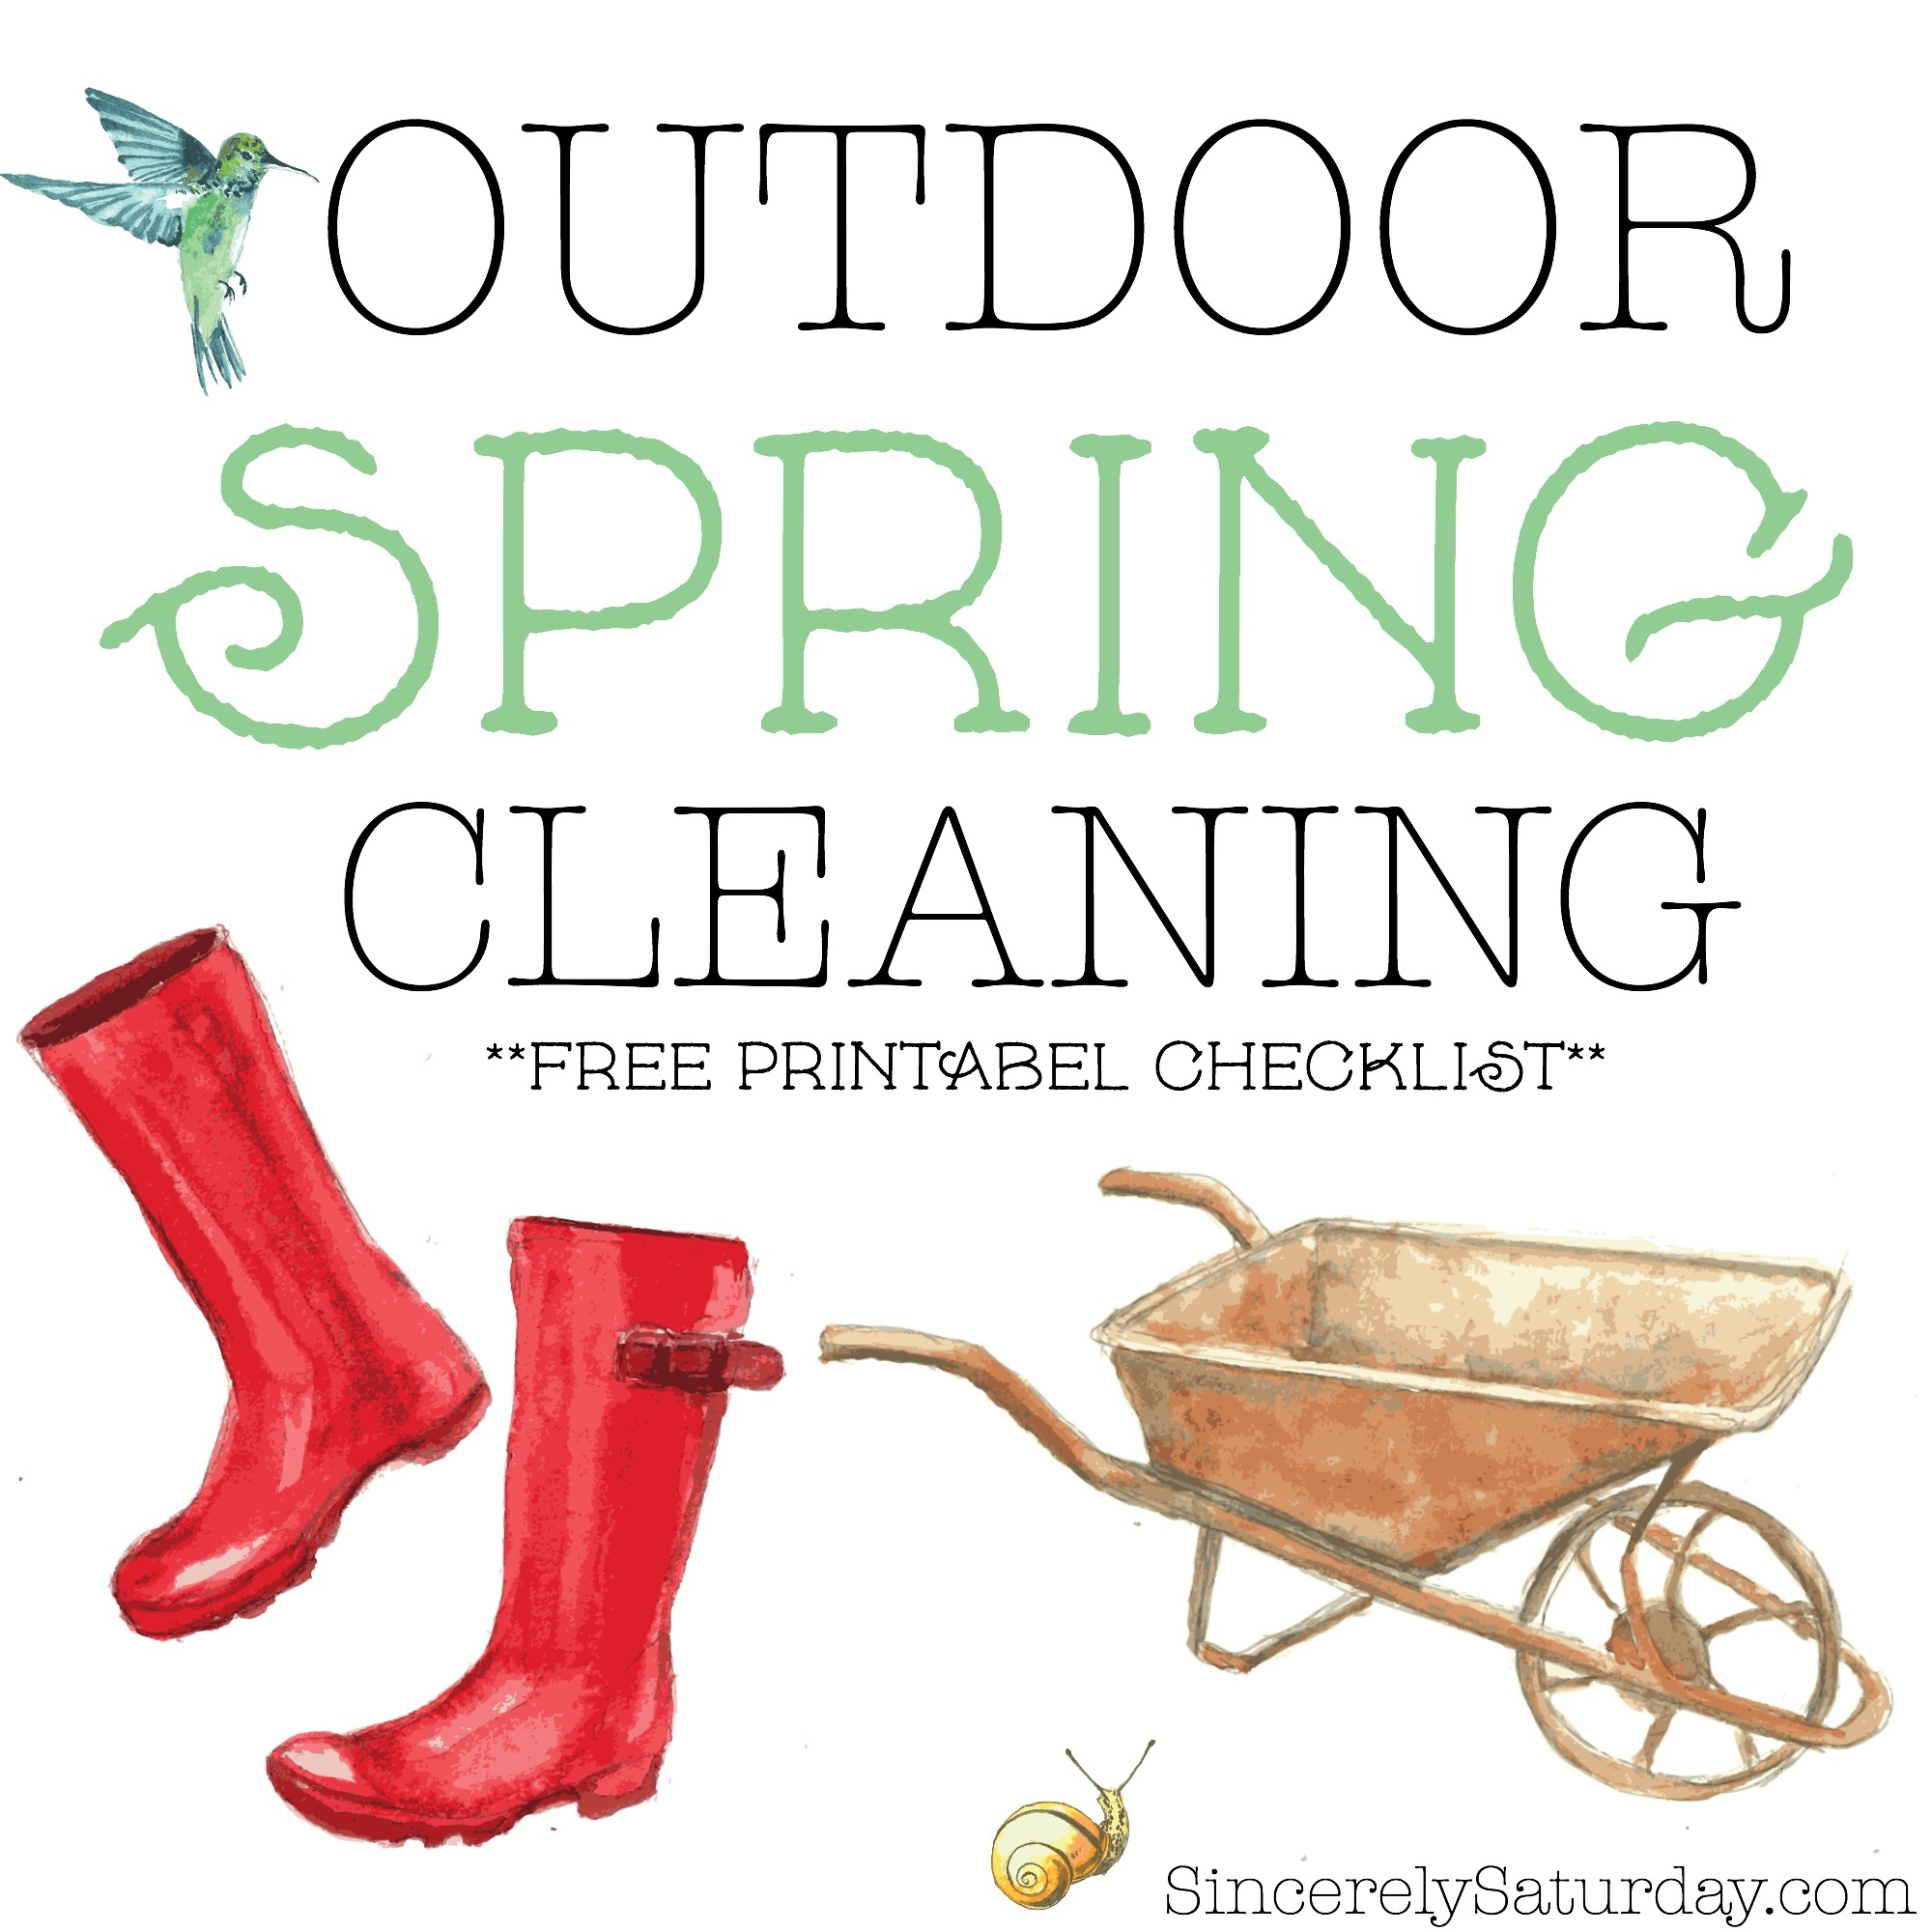 Outdoor spring cleaning